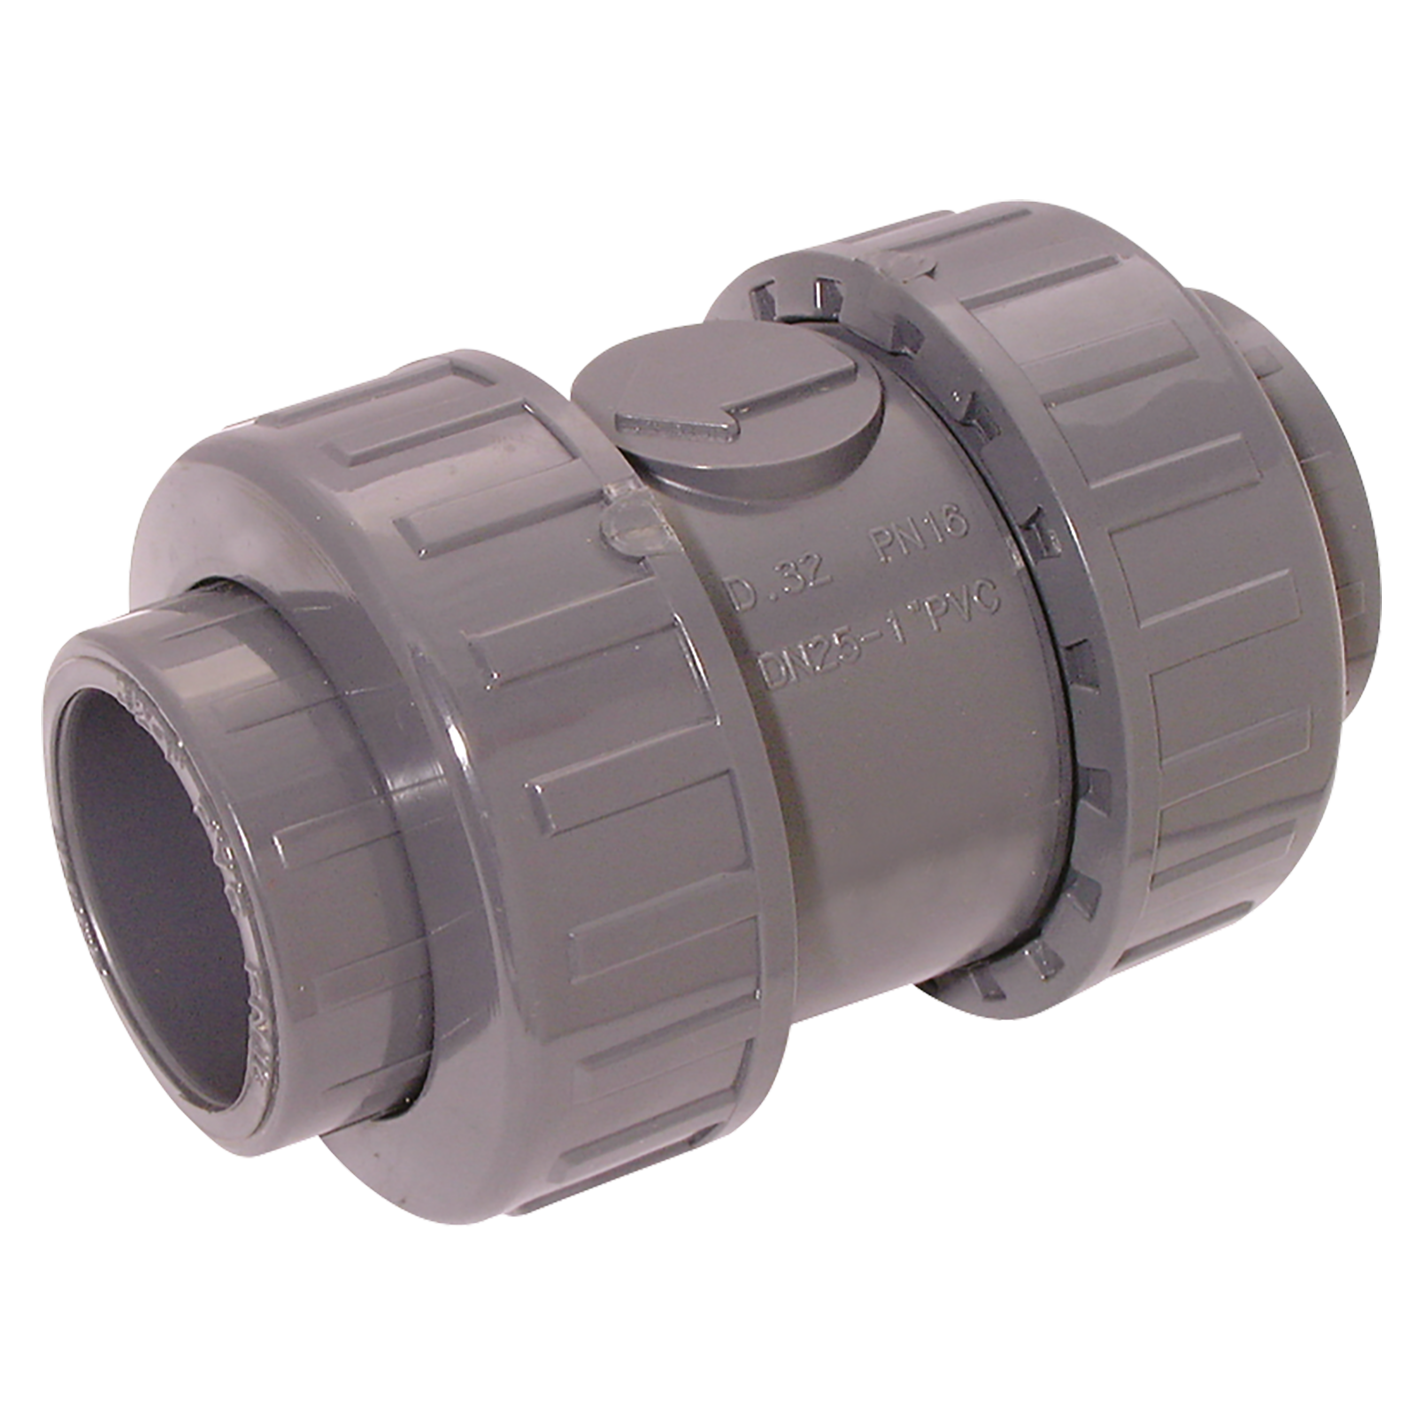 1.1/4" ID ABS CHECK VALVE DOUBLE UNION